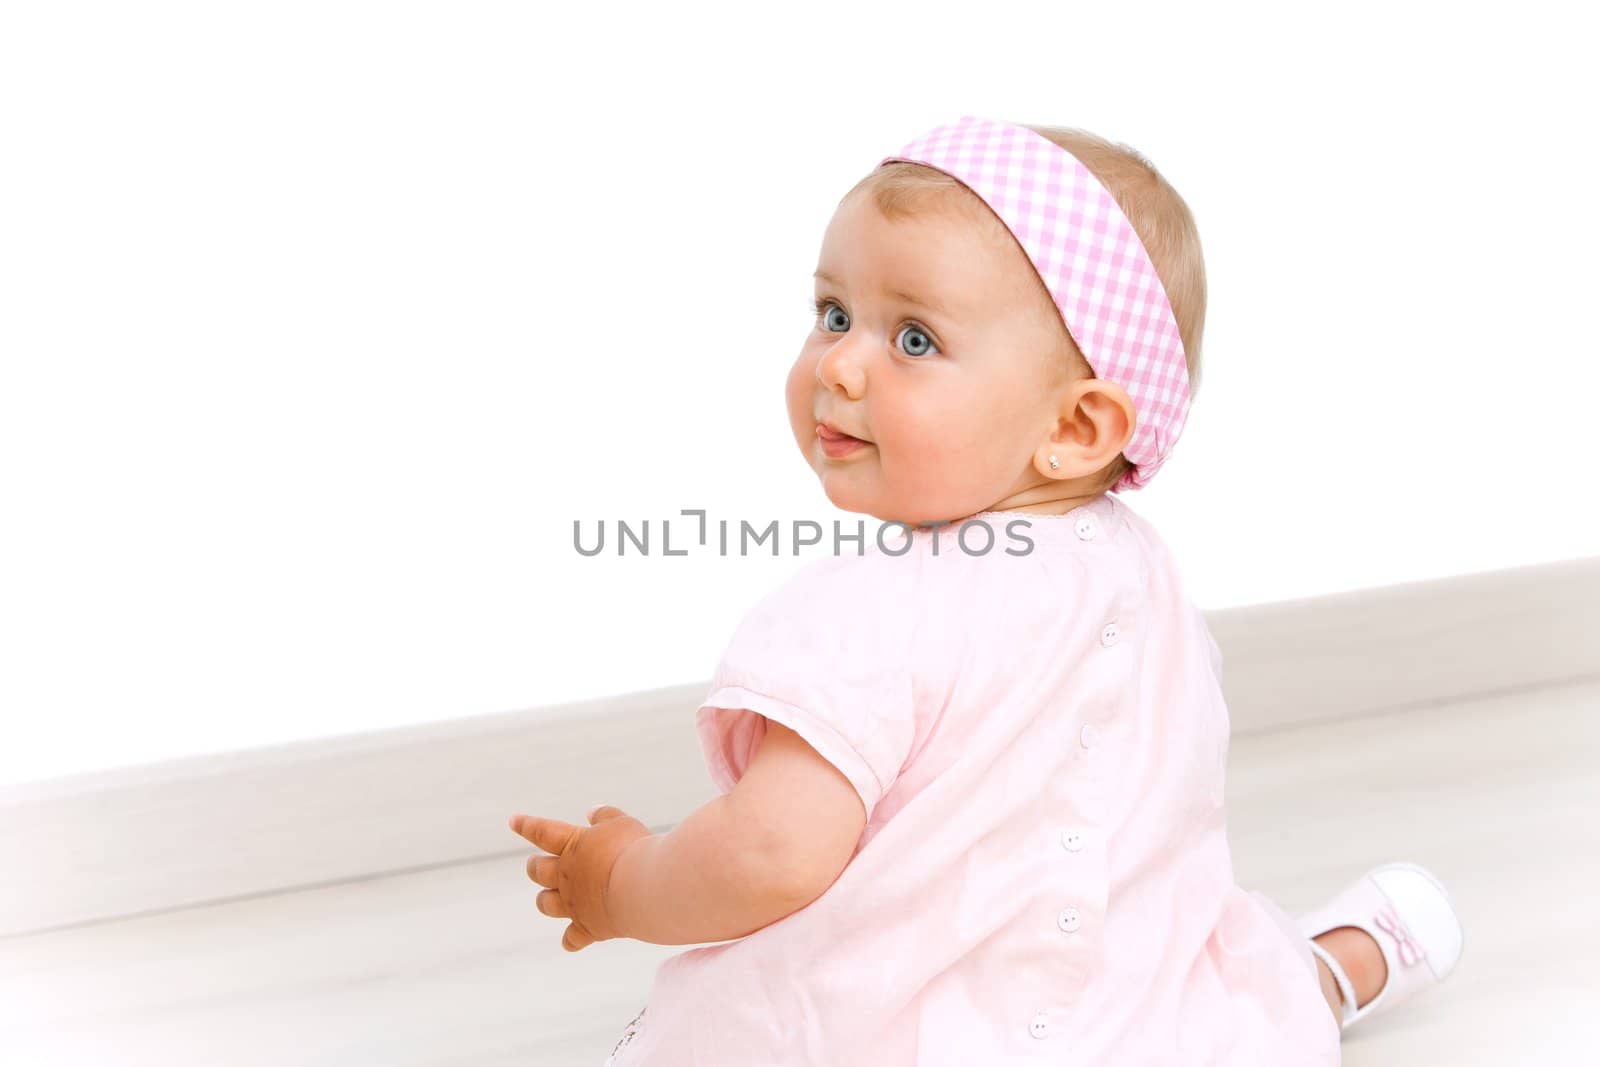 Blue eyed baby girl wearing a pink dress and pink head band sitting on the floor.